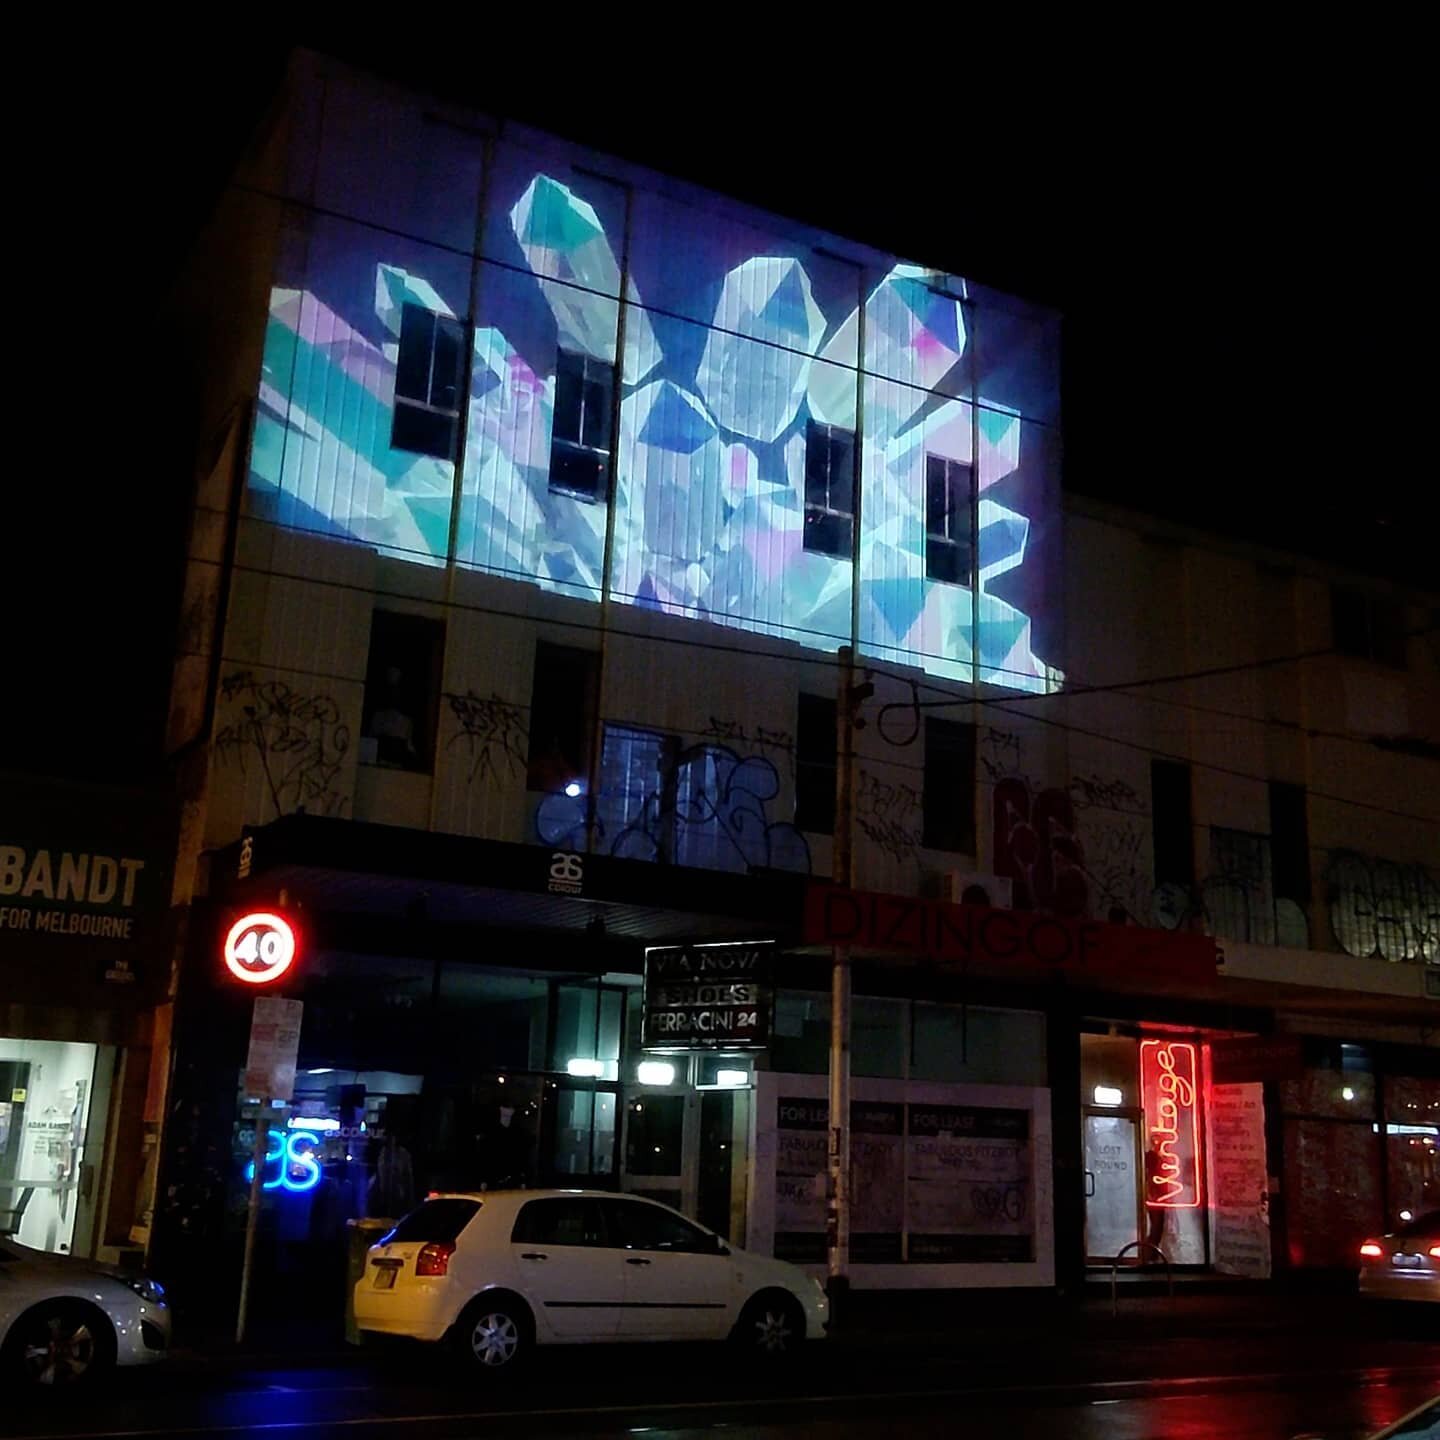 &lsquo;Reflections&rsquo; by Krystal Schultheiss returned as projection installation for the Leaps and Bounds Music Festival in Fitzroy, Melbourne, Australia. The work was selected by project art curators from The Centre of Projection Art. &lsquo;Ref